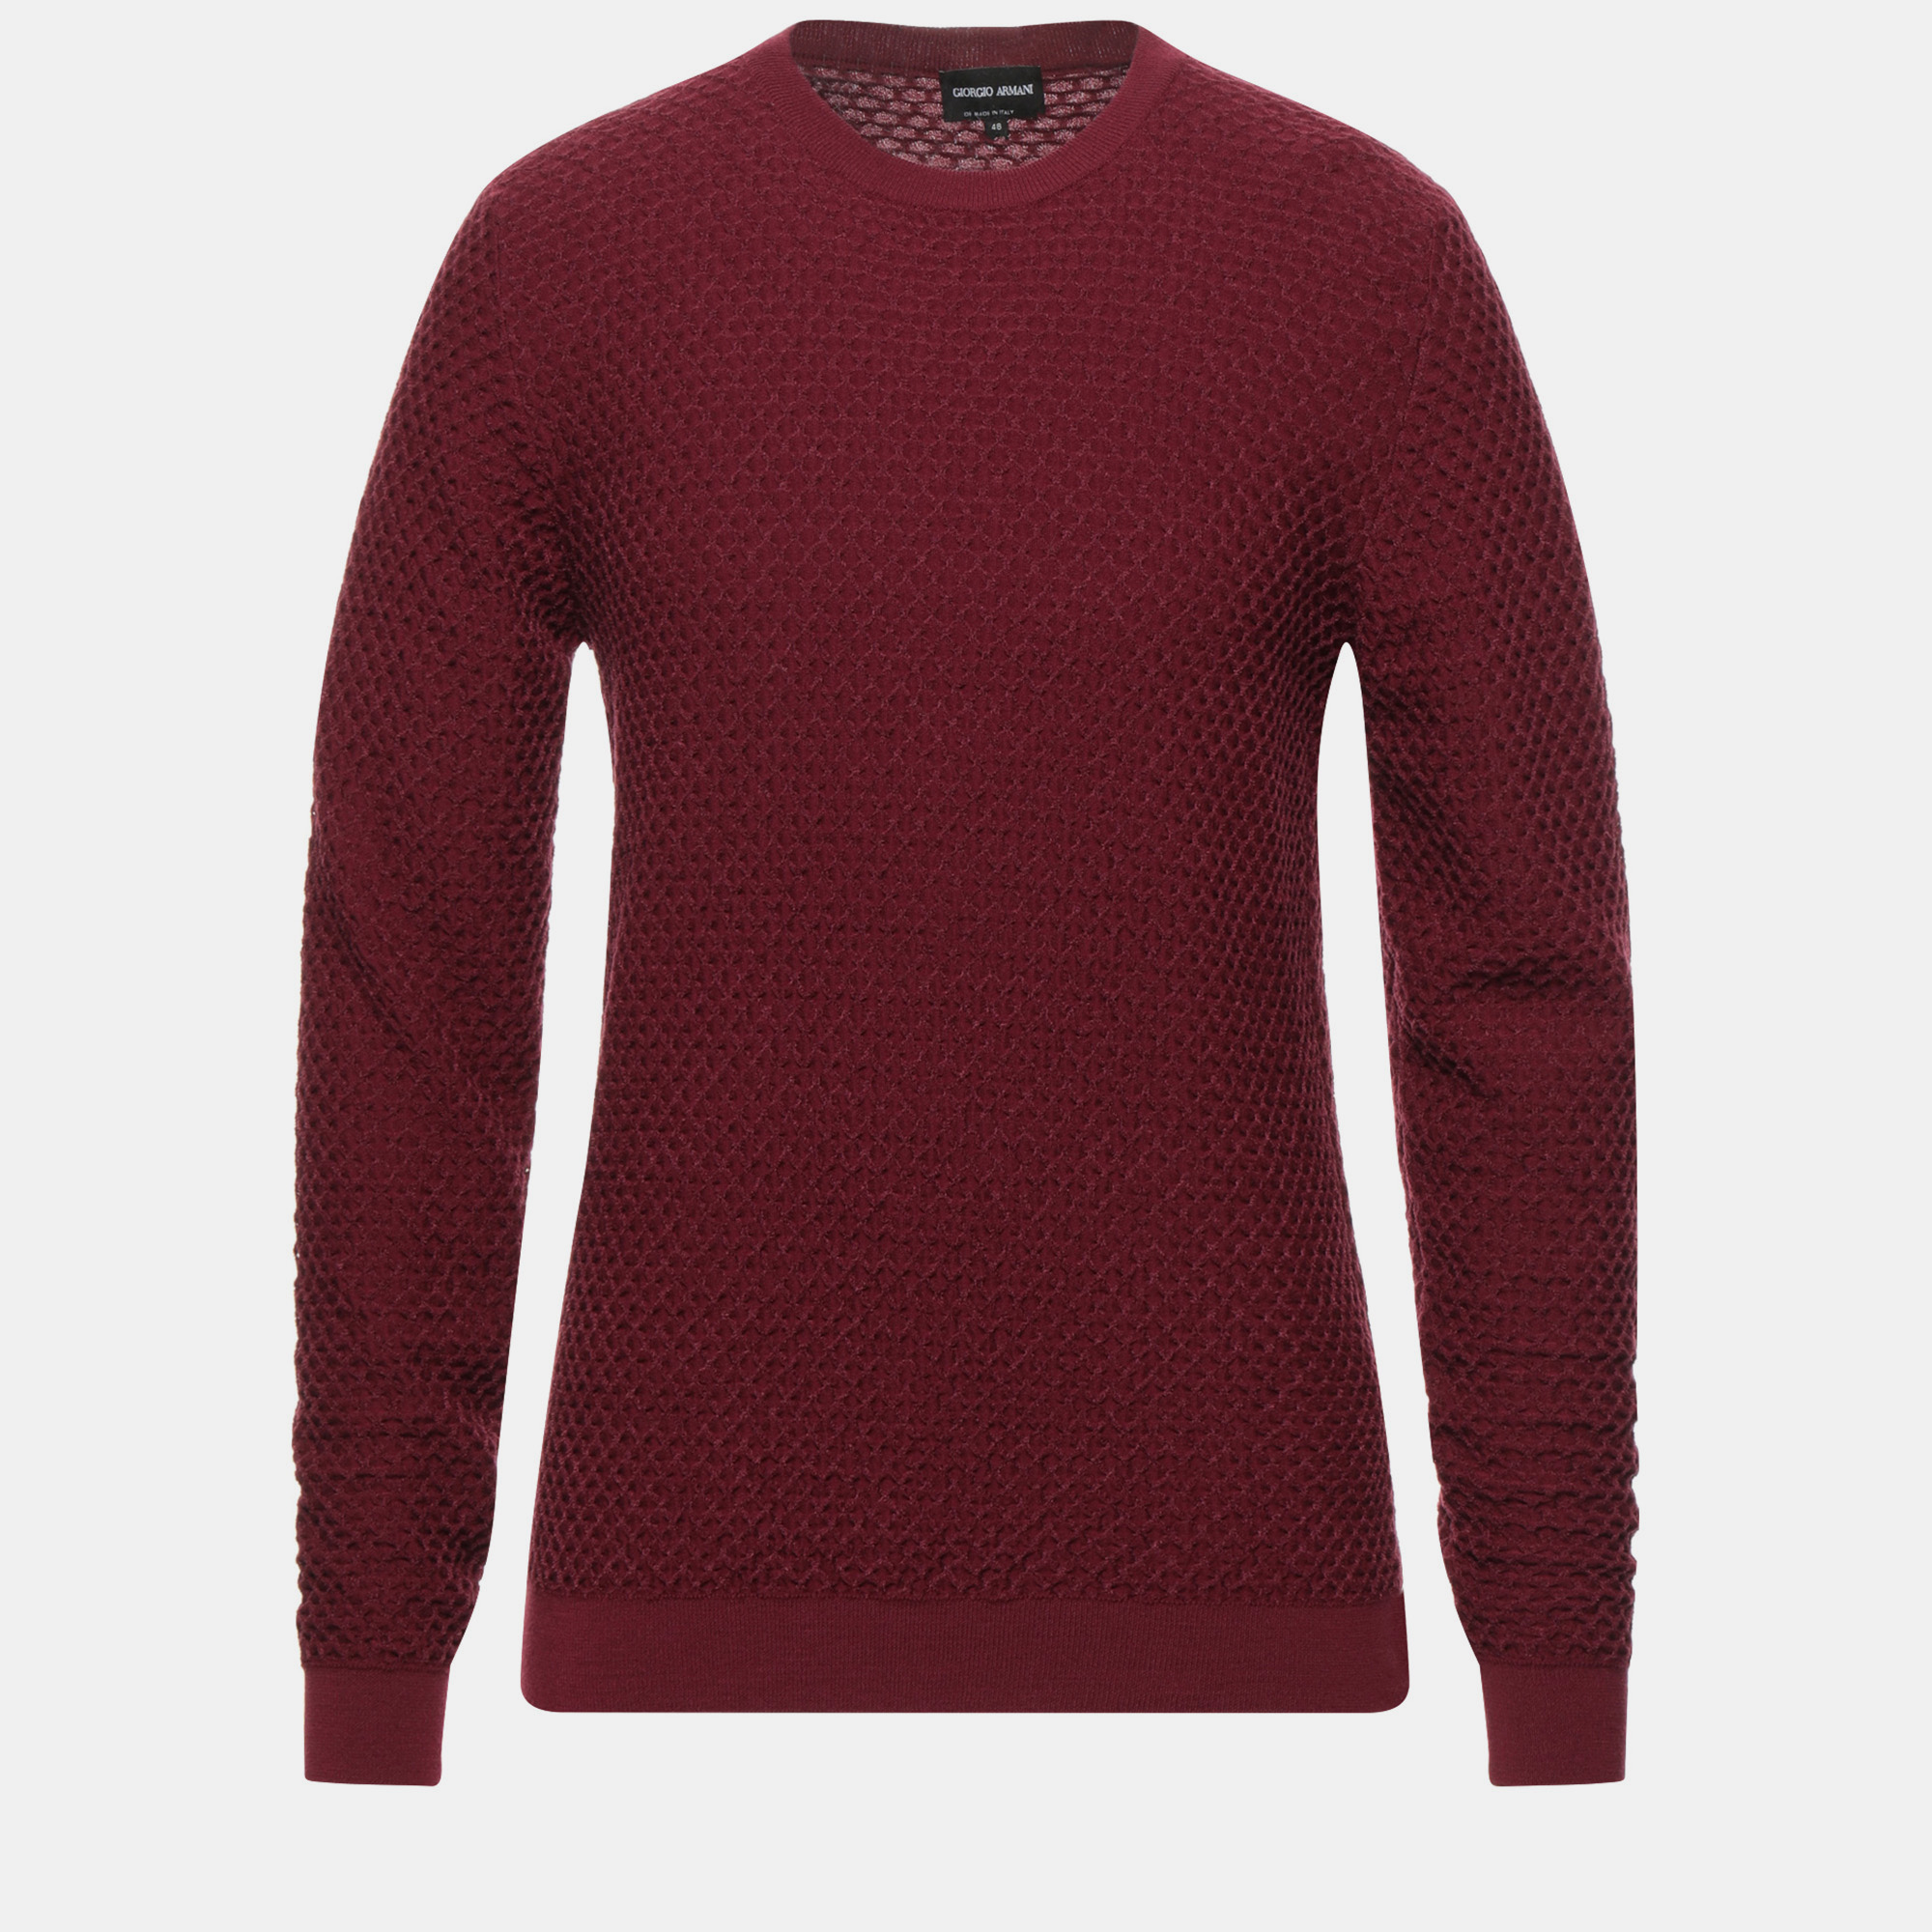 Pre-owned Giorgio Armani Burgundy Textured Wool Knit Sweater M (it 48)